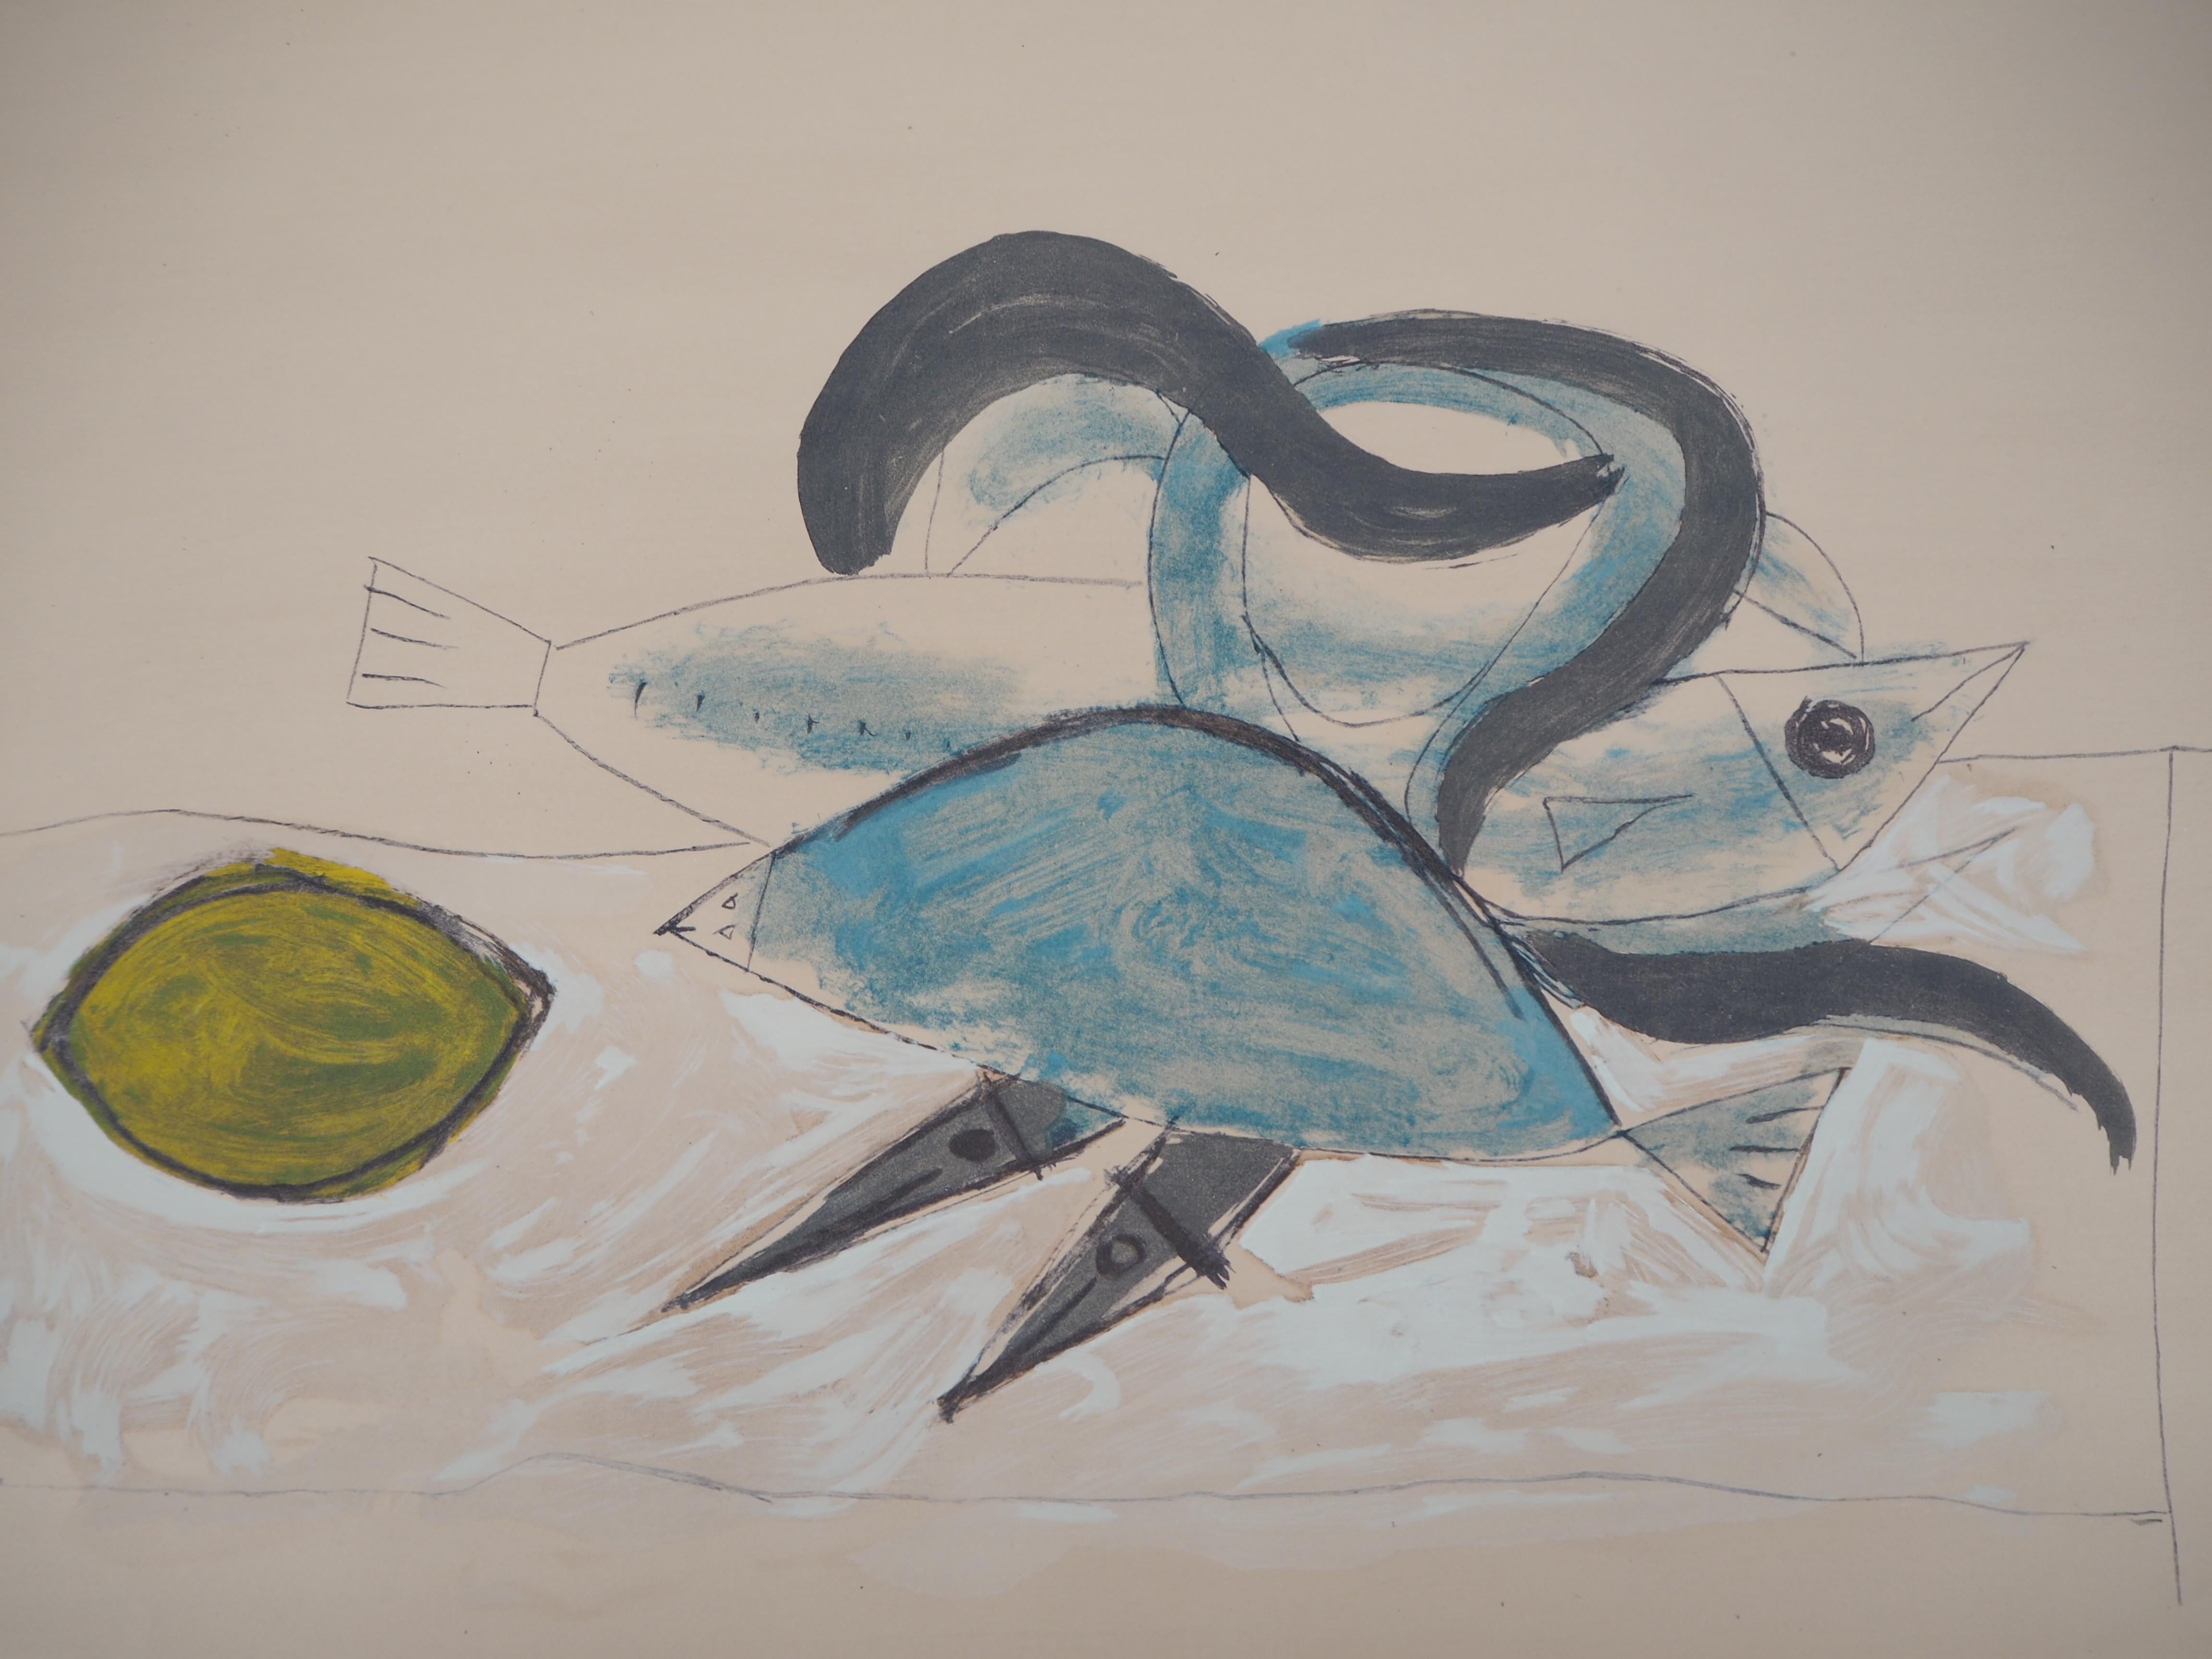 Still Life with Fishes and Lemon - Lithograph (Jacomet 1960) - Print by (after) Pablo Picasso